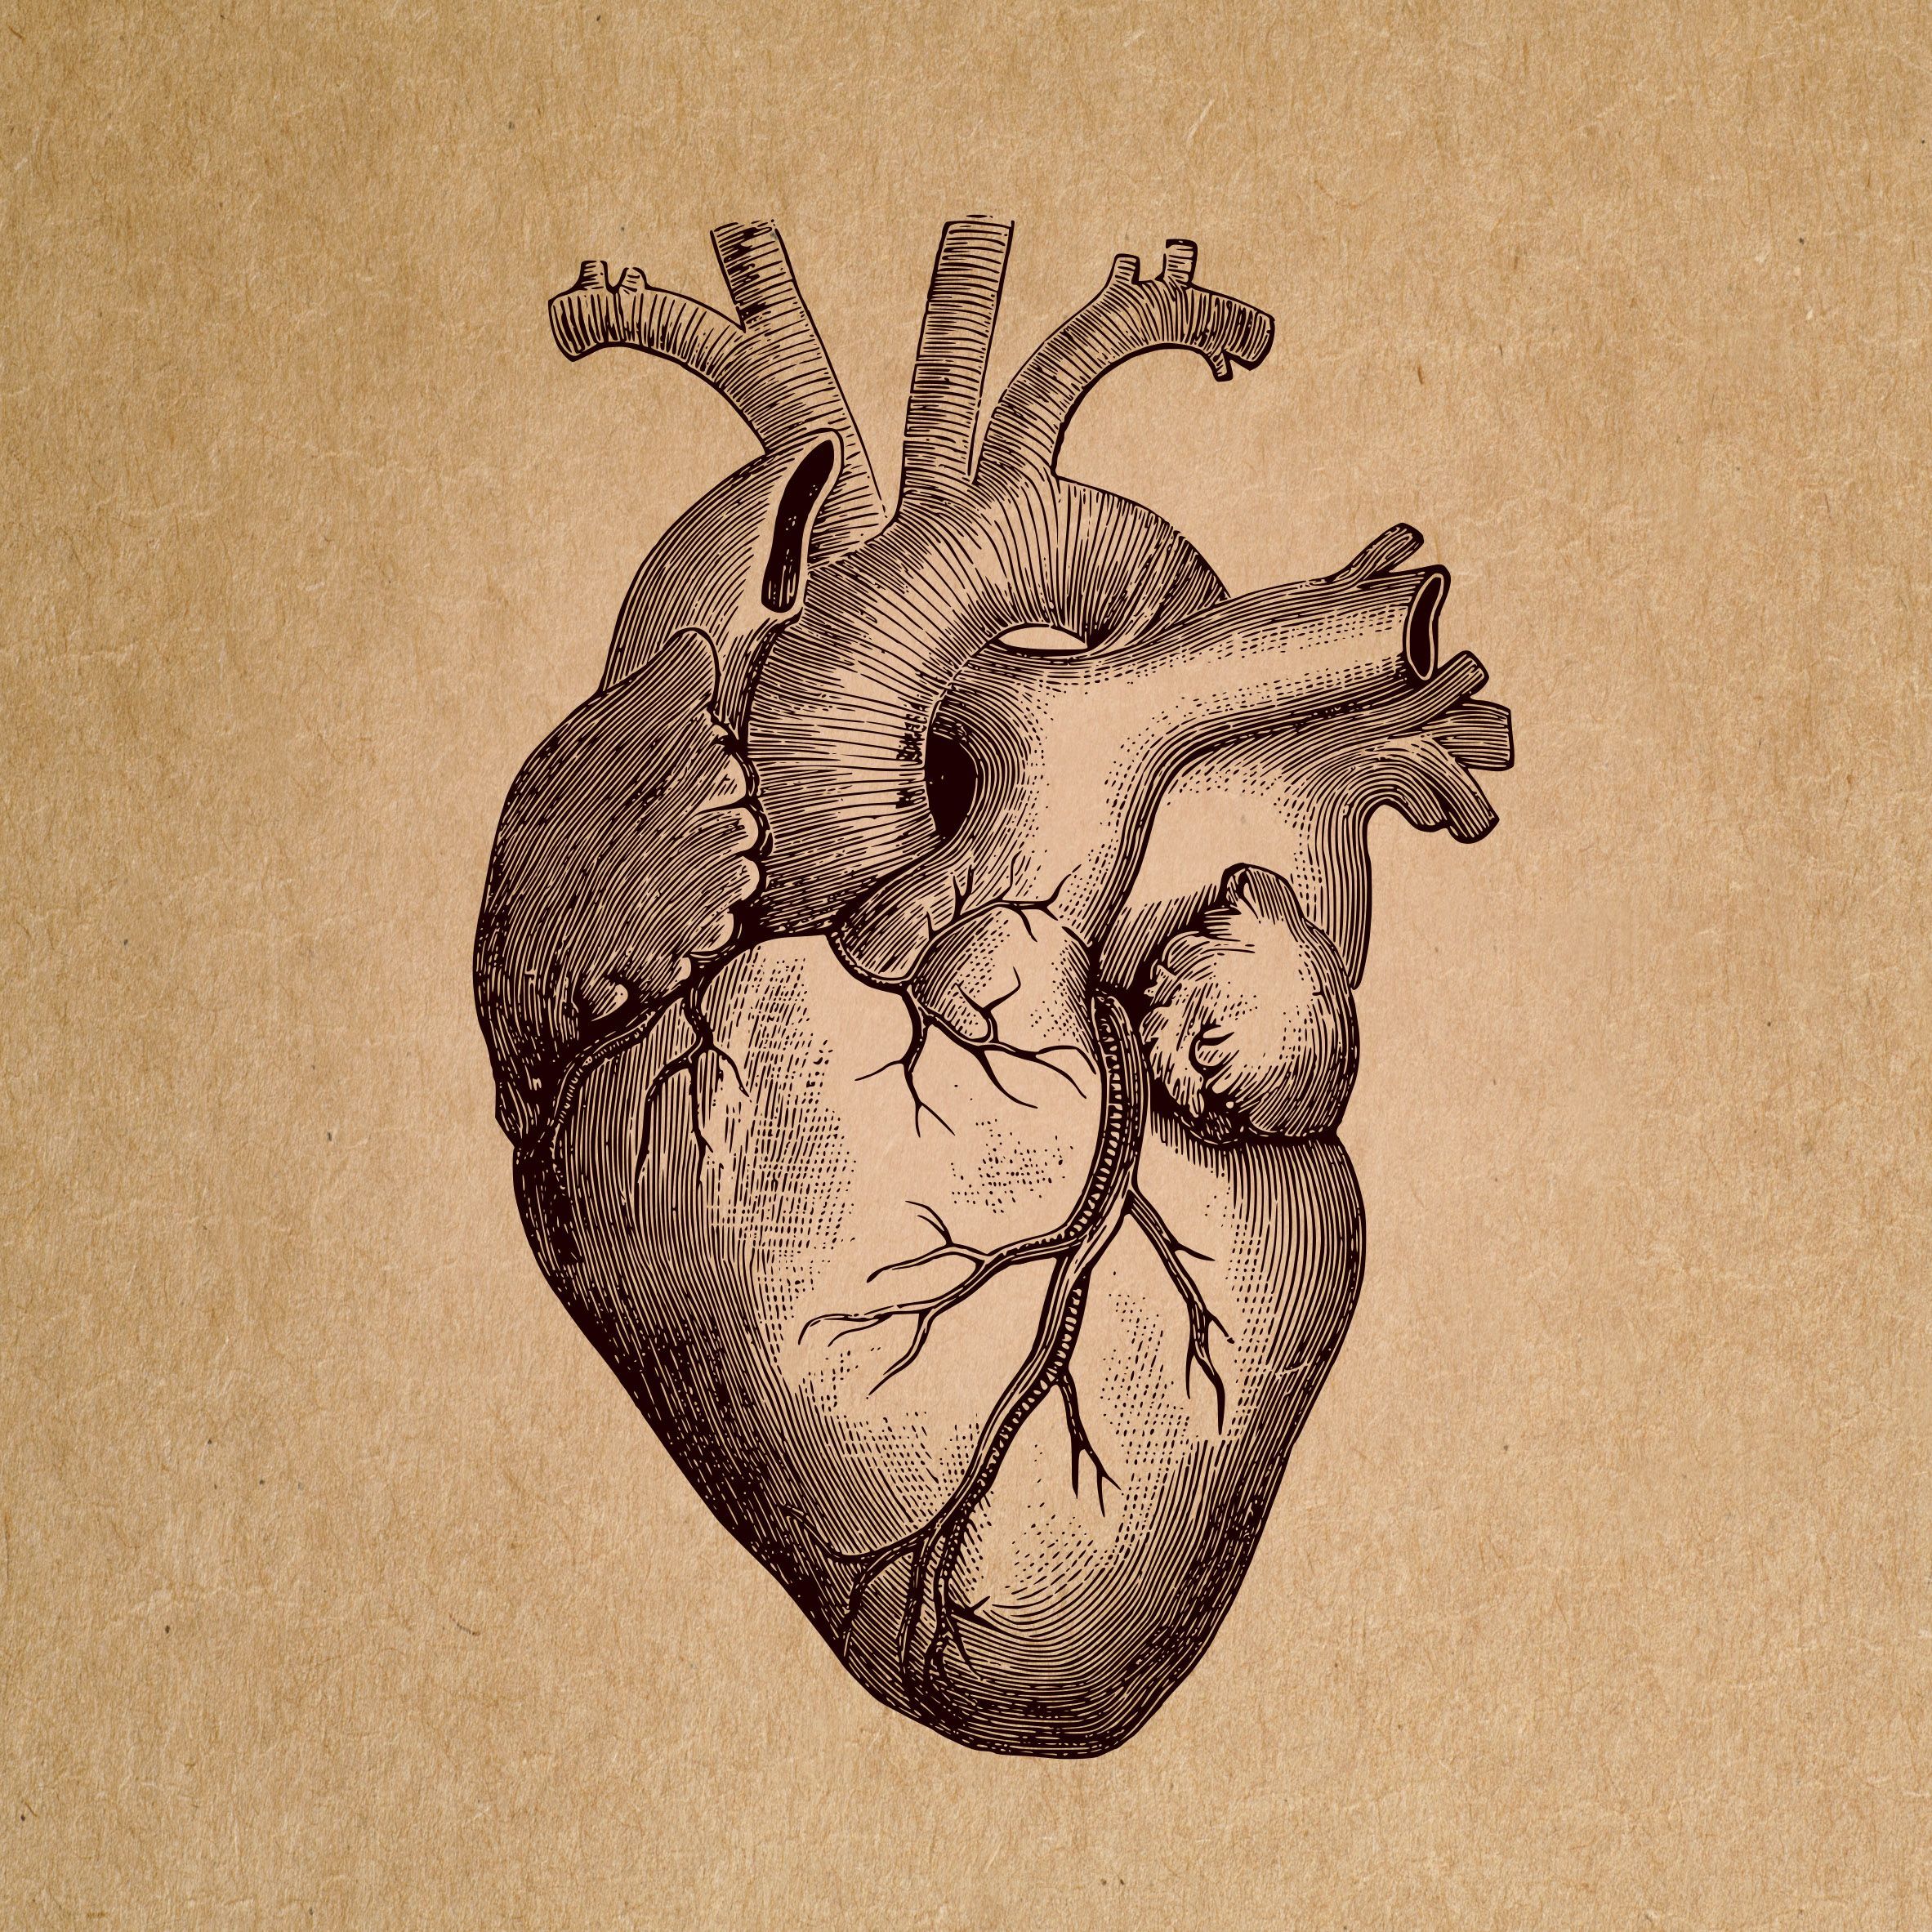 An image of a heart on brown paper - Anatomy